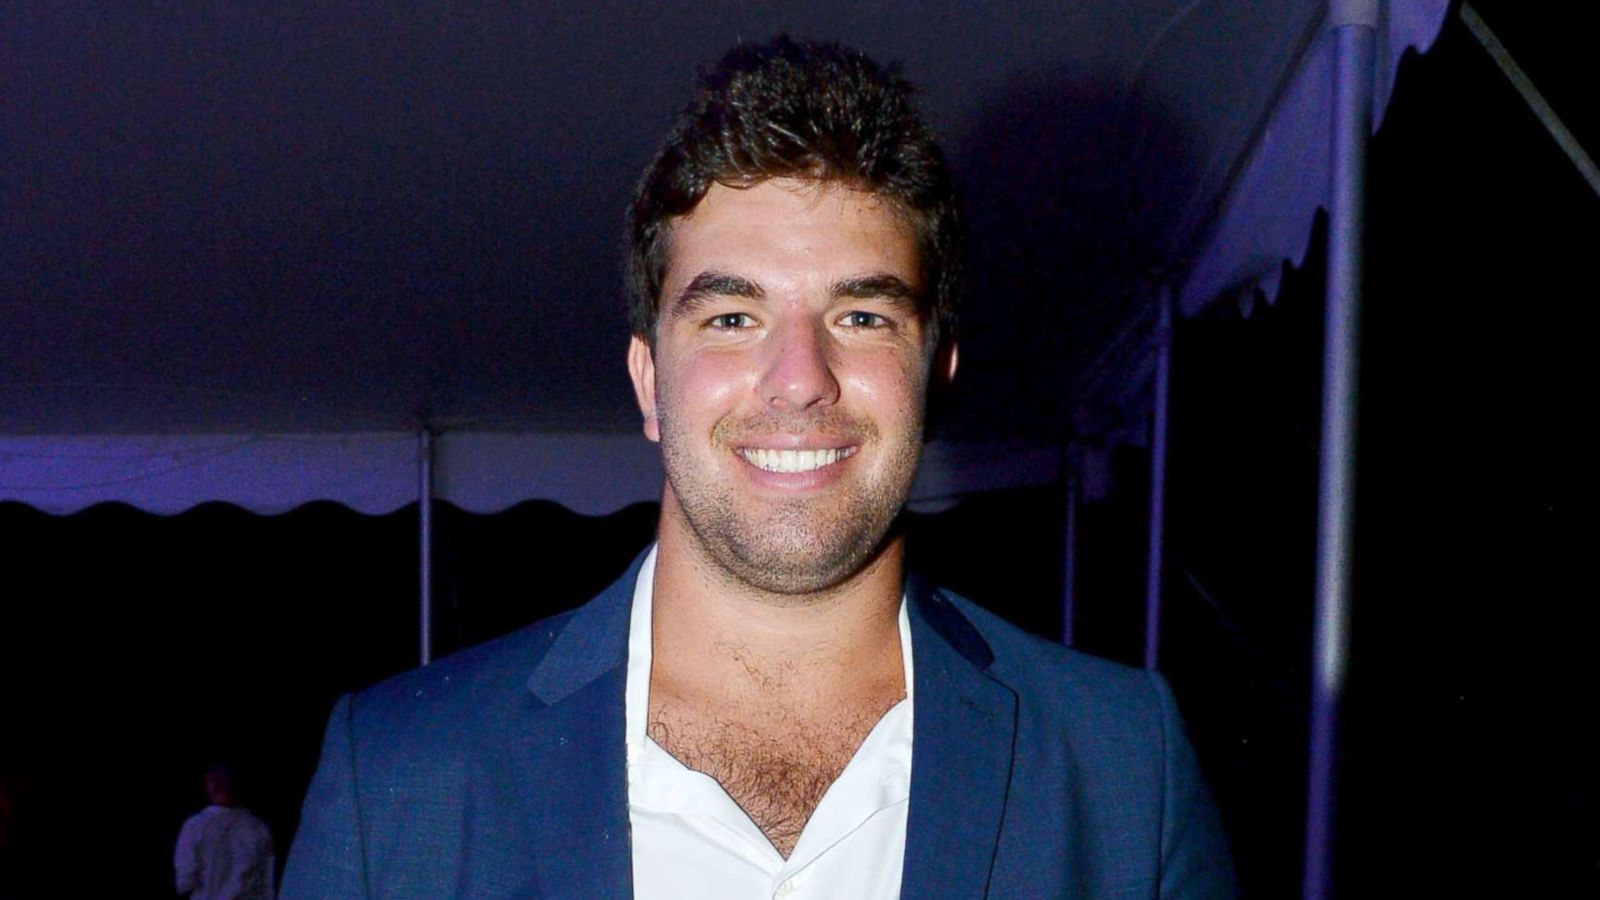 Fyre Festival promoter pleads guilty to fraud - ABC News